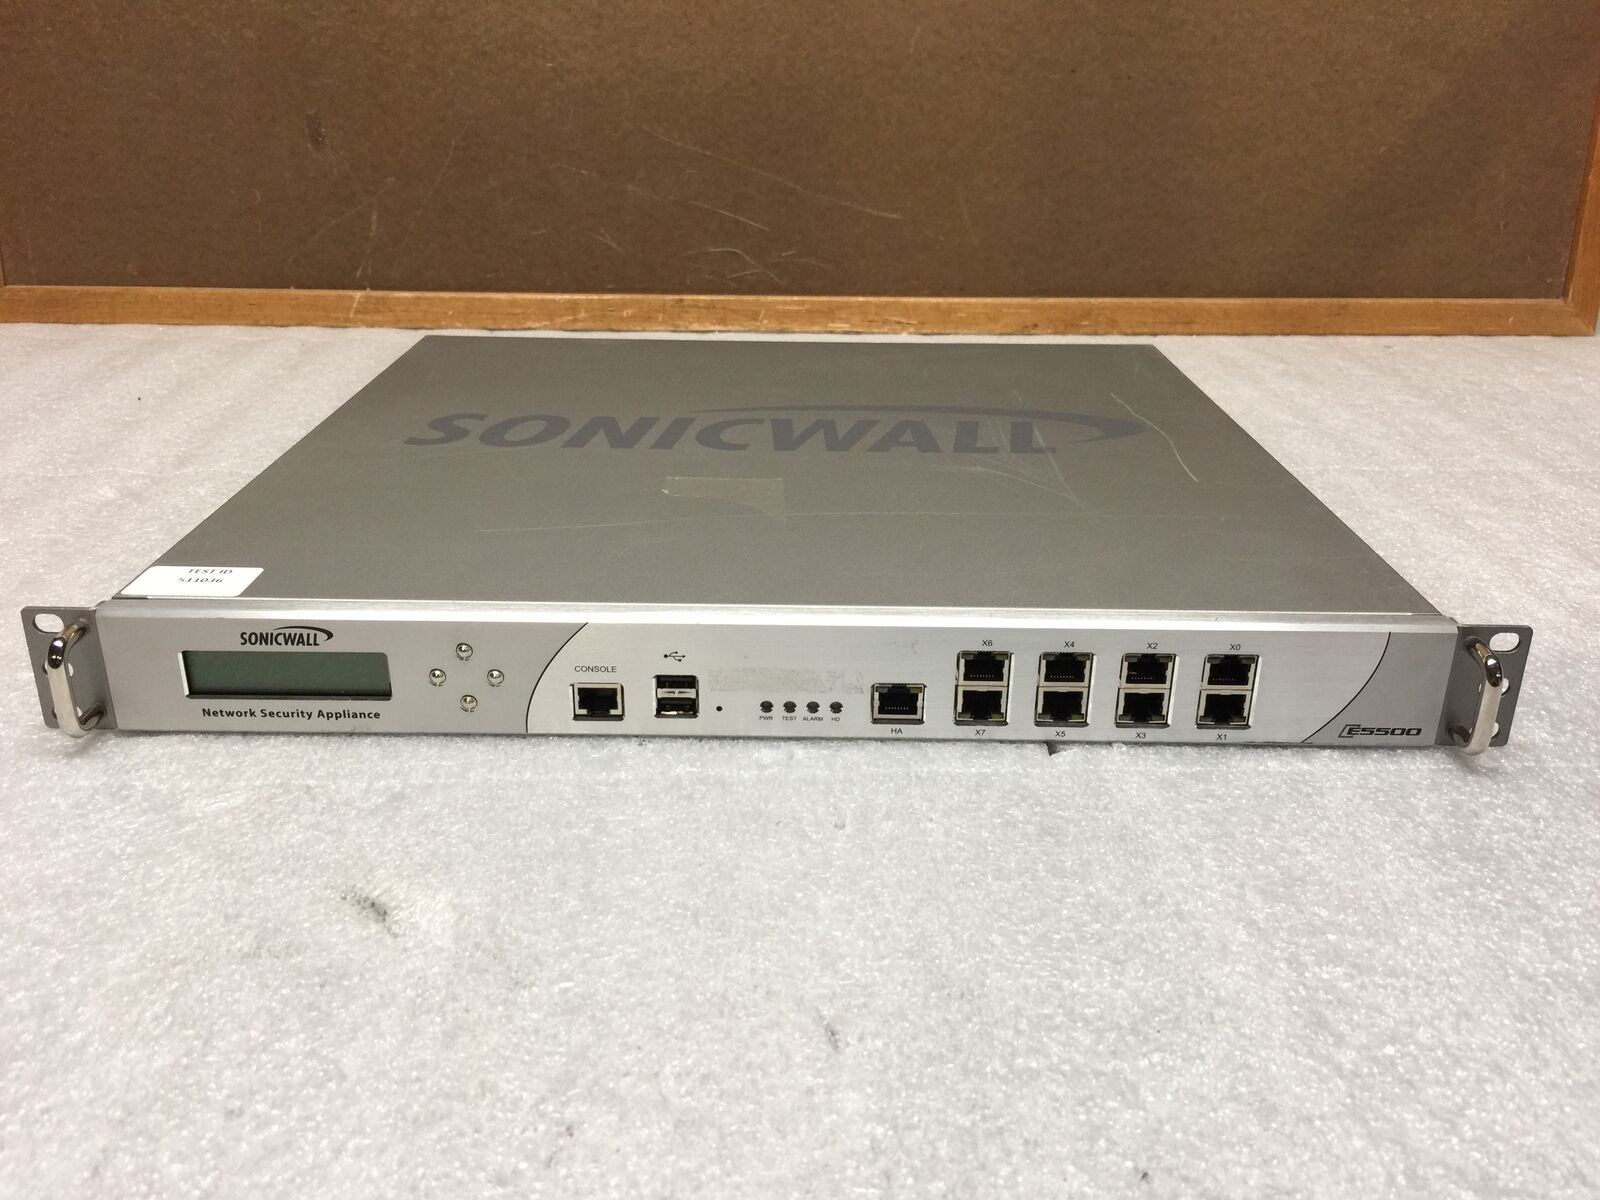 Sonicwall NSA E5500 Model 1RK22-073 Network Security Appliance 101-500228-61